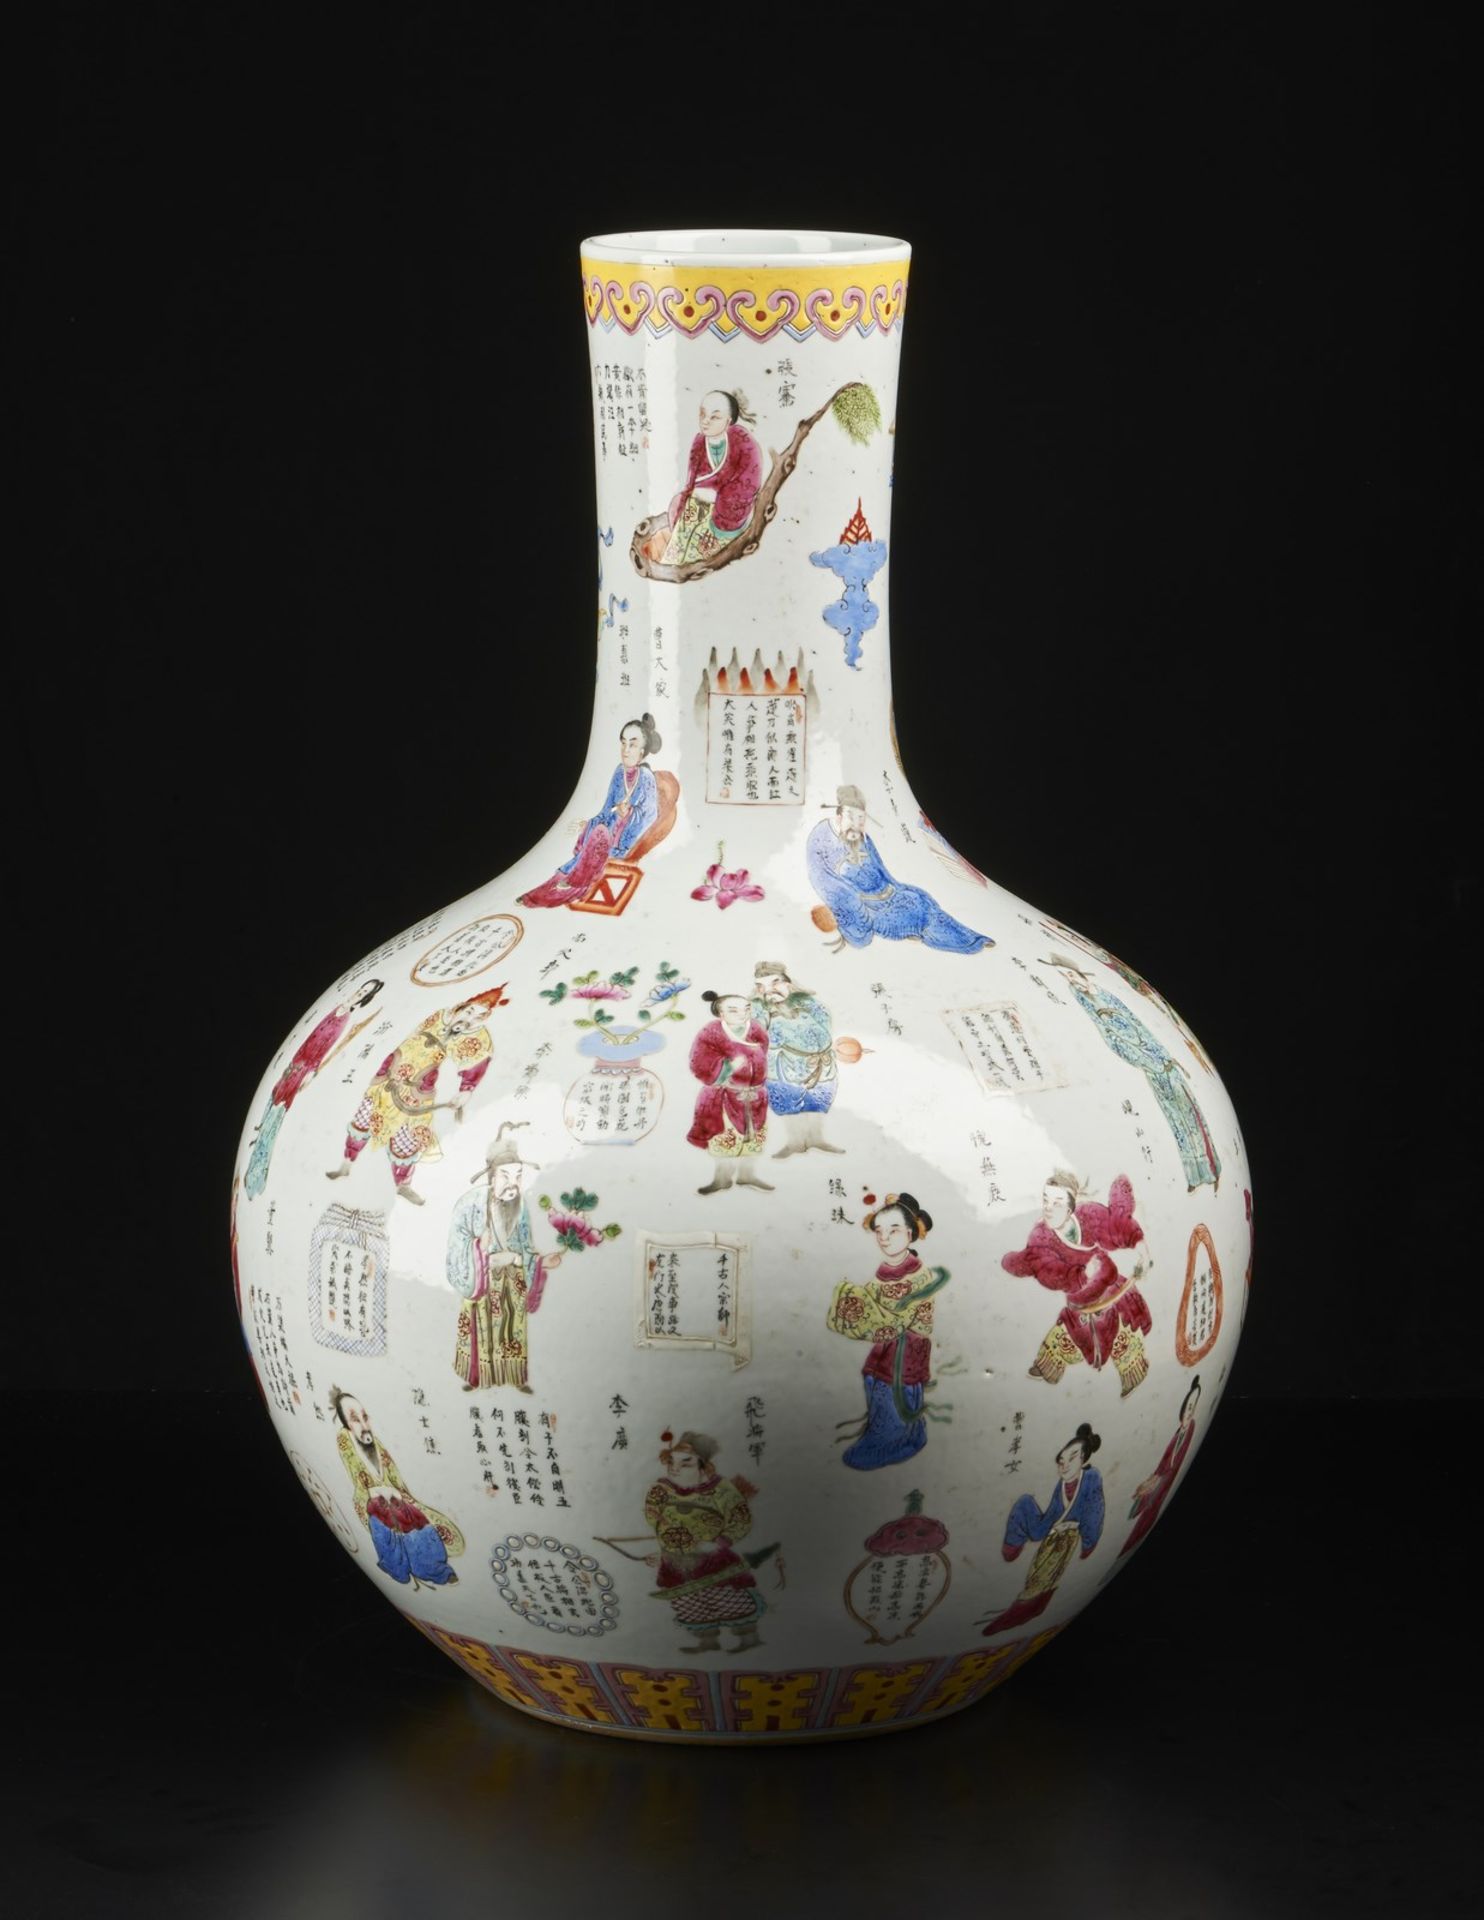 Arte Cinese A large tianchuping porcelain vase painted with characters and long inscriptionsChina, - Image 2 of 5